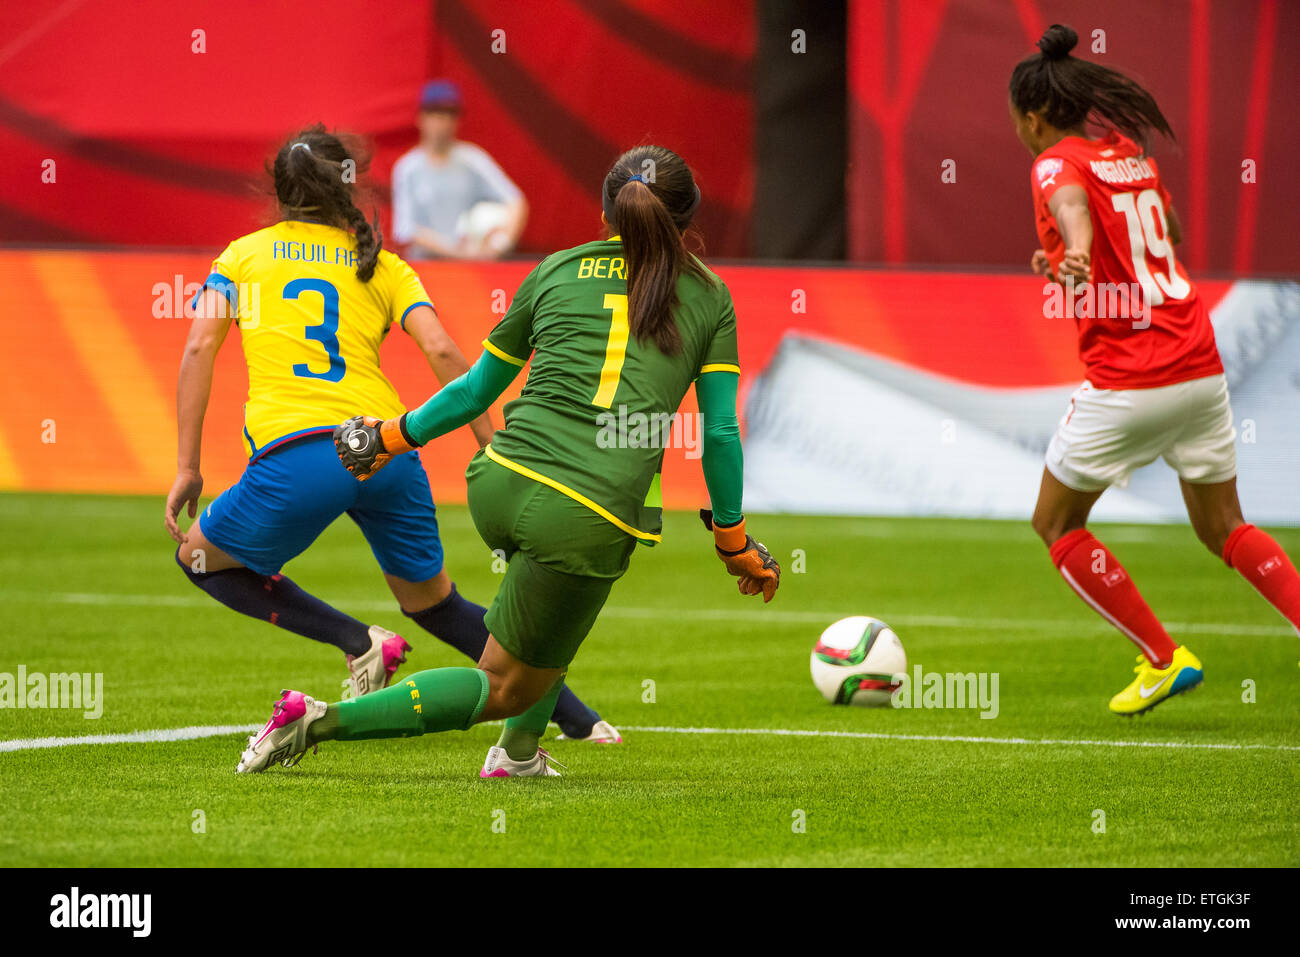 Vancouver, Canada - June 12, 2015: Ecuador goalkeeper Shirley BERRUZ (#1) moves to defend an attack from Switzerland forward Eseosa AIGBOGUN (#19) during the opening round match between Switzerland and Ecuador of the FIFA Women's World Cup Canada 2015 at BC Place Stadium. Switzerland won the match 10-1. Stock Photo